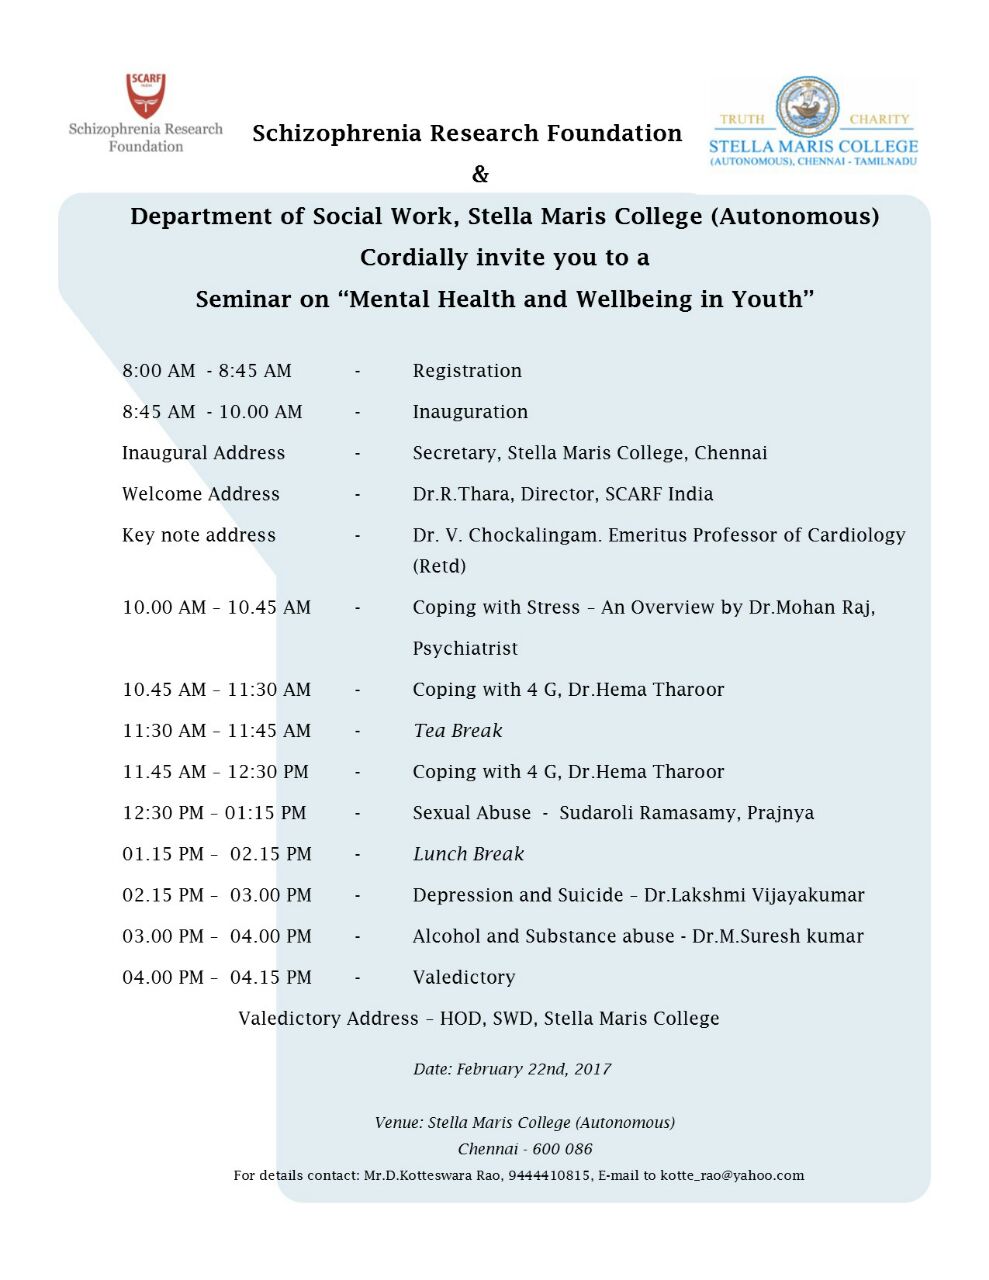 Seminar on Mental Health and Wellbeing in Youth.